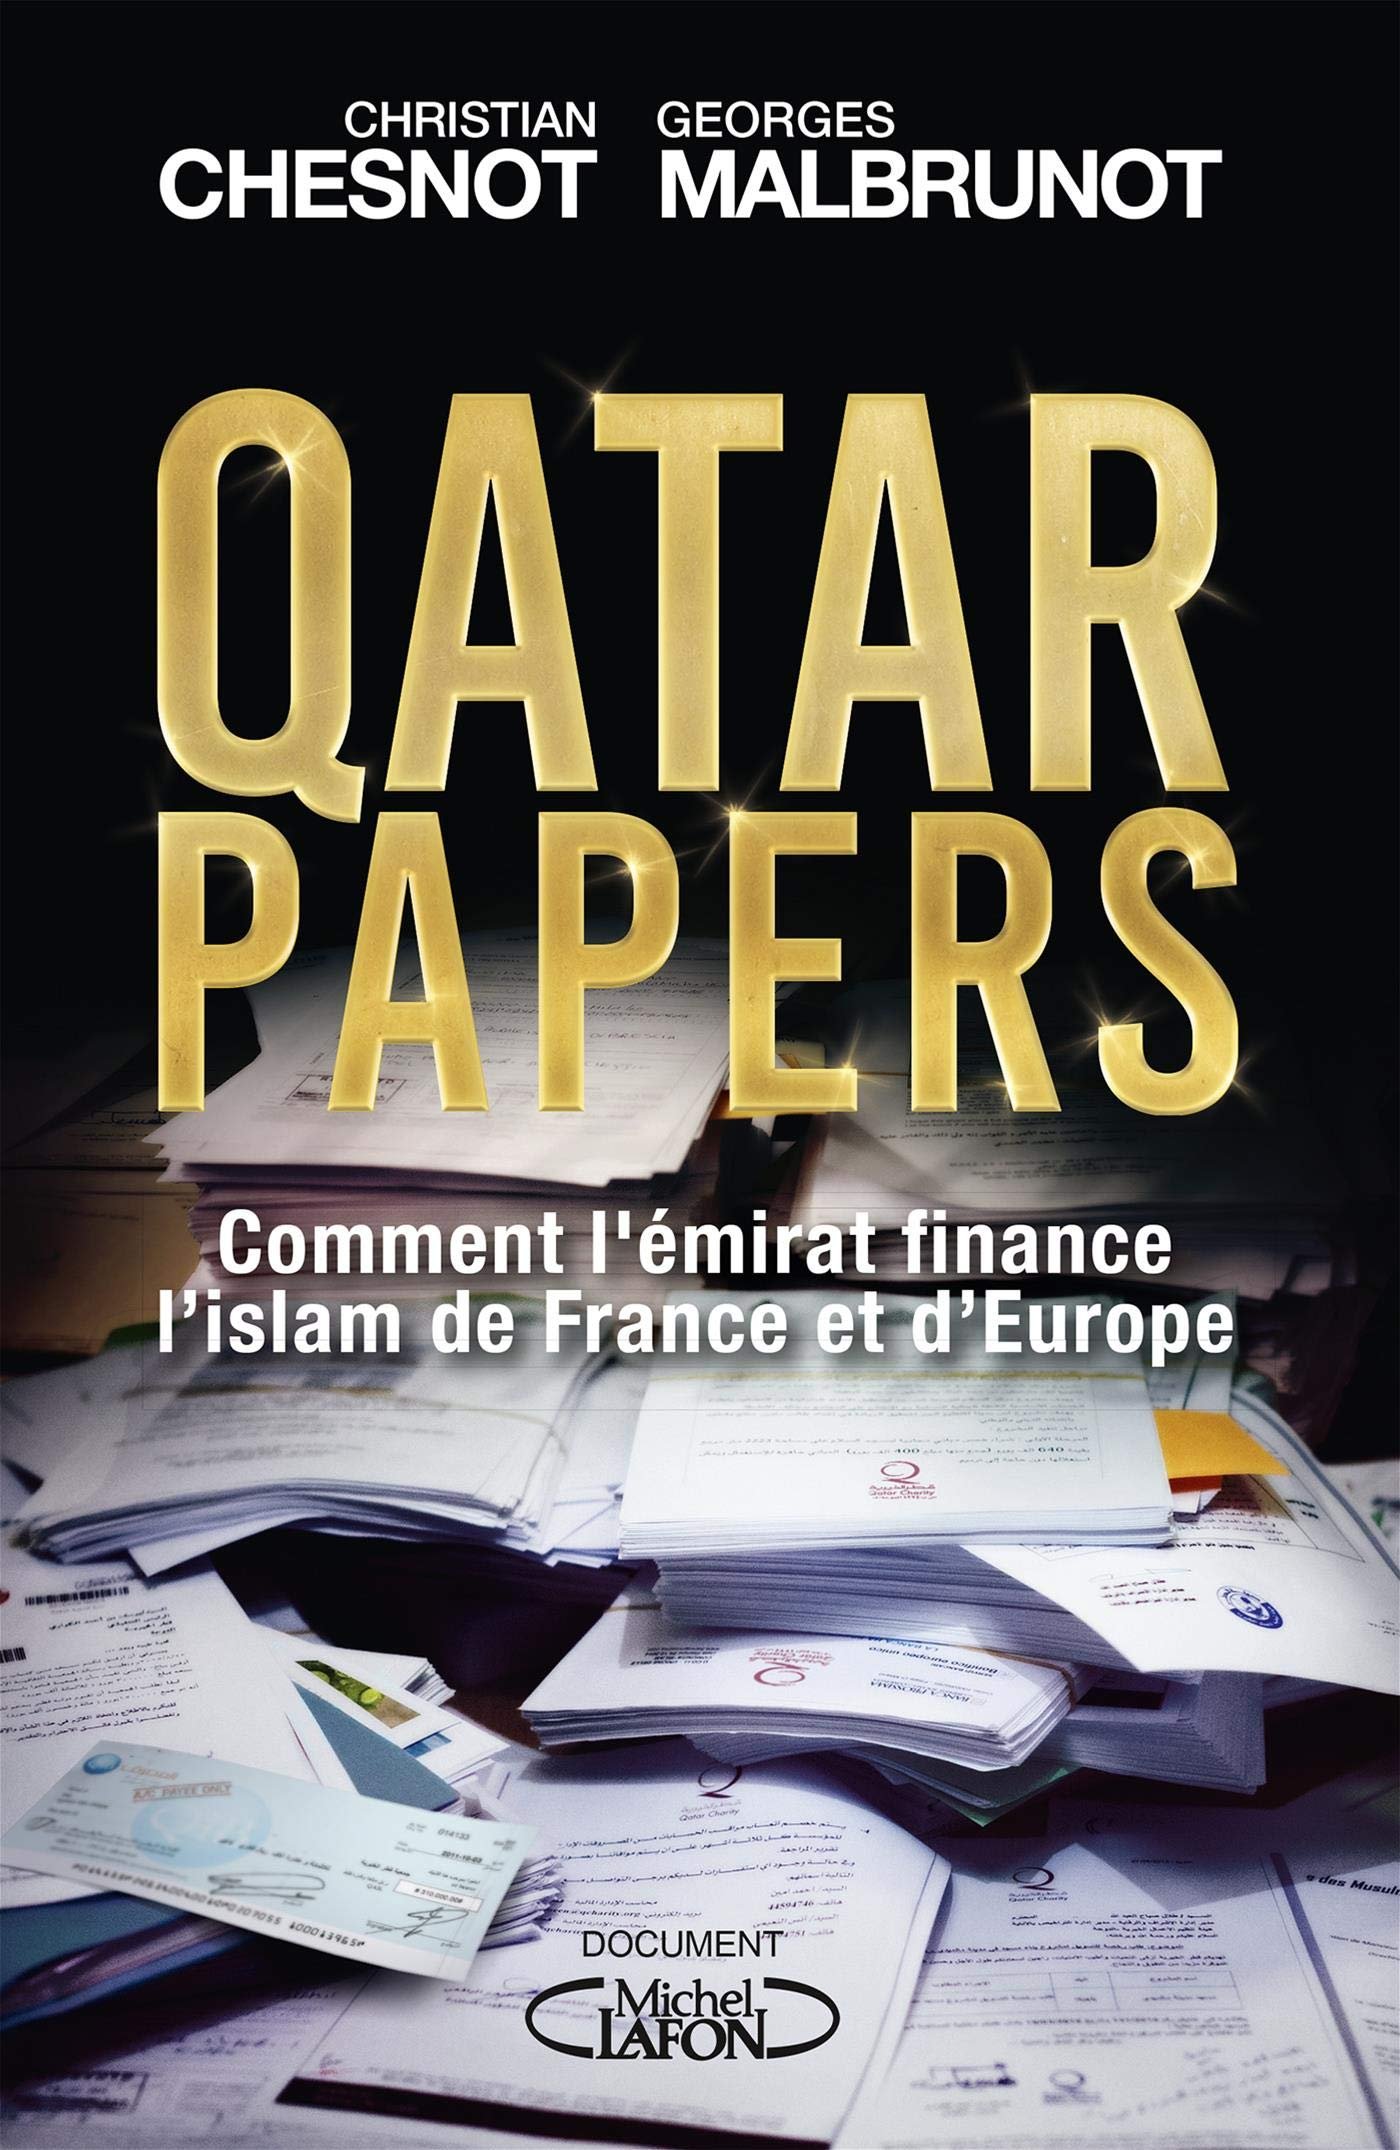 Christian Chesnot et Georges Malbrunot – Qatar papers